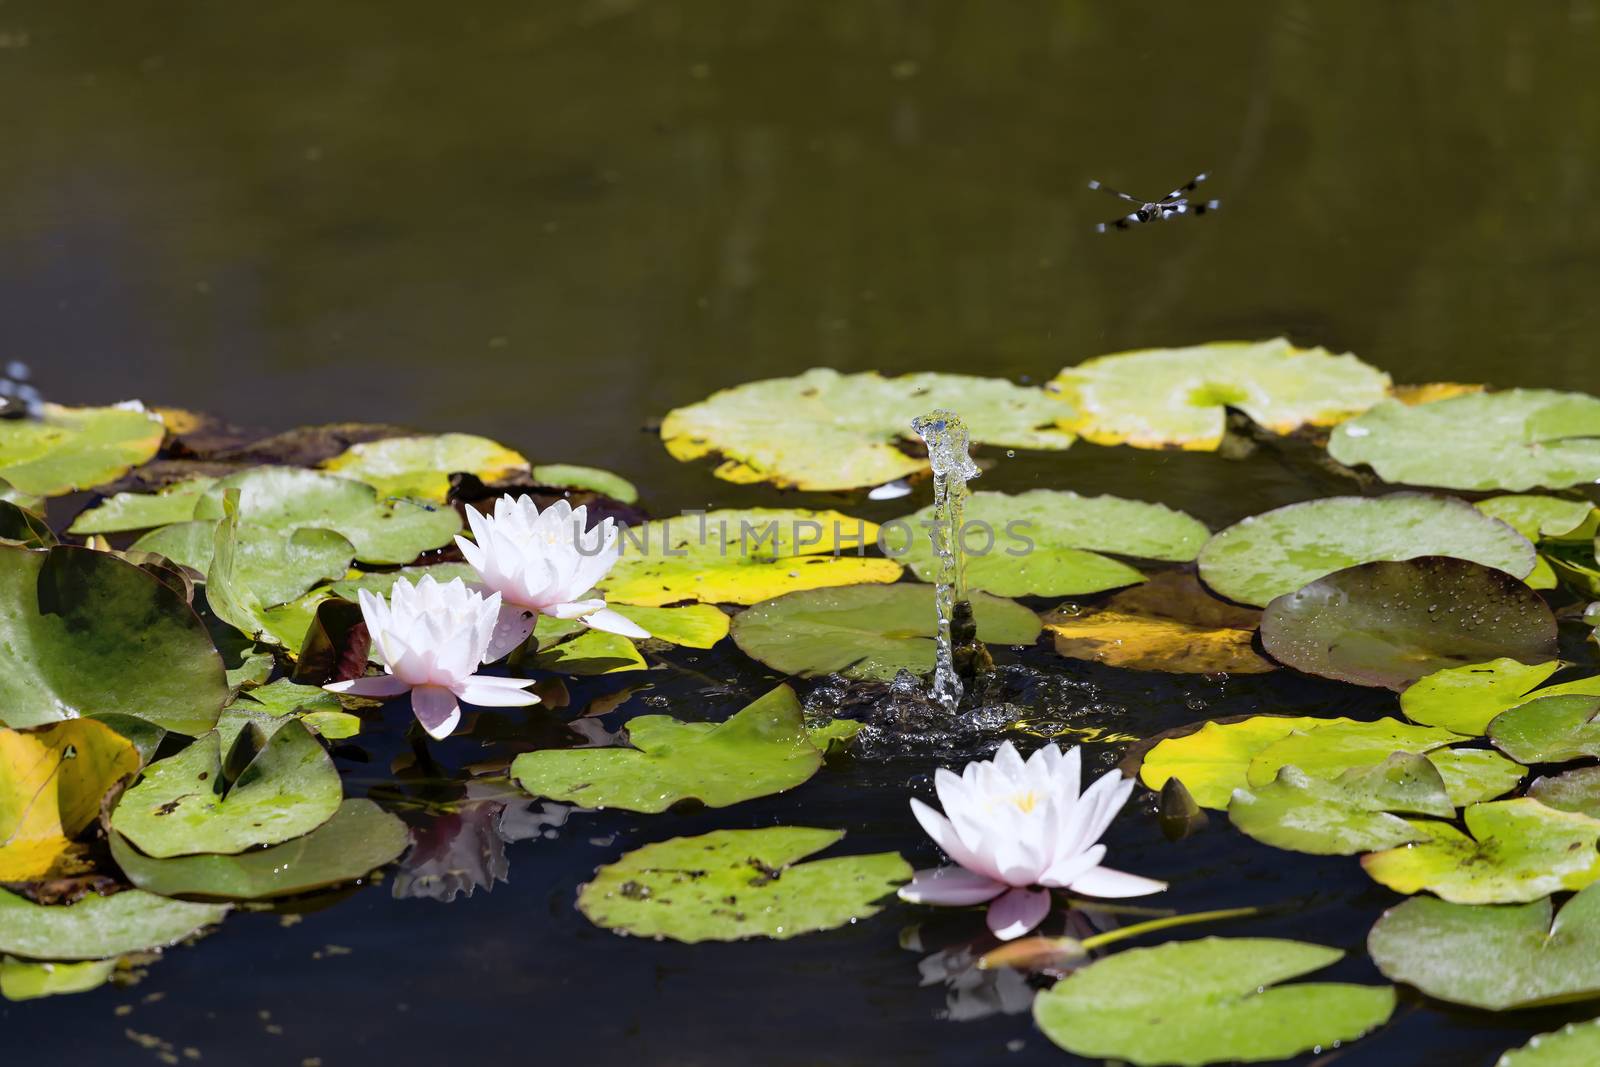 This photo was taken at a formal botanical garden near San Francisco, California. Spring had arrived, and flowers are in bloom. This image features a lily pond, Dragonfly, and beautiful blooming Lotus flower with a small fountain.